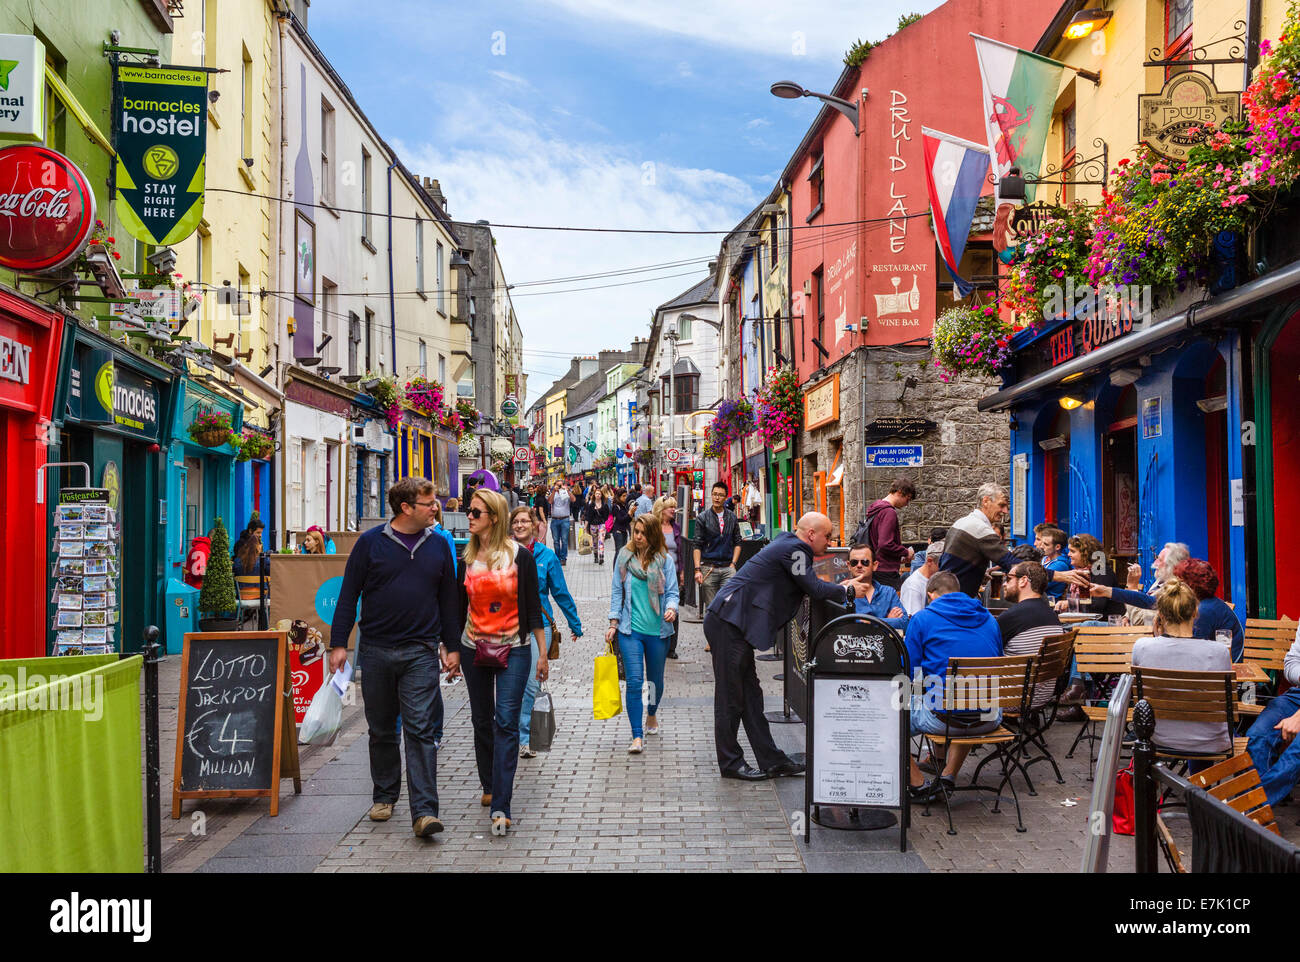 Pubs, restaurants and shops on Quay Street in Galway City Latin Quarter, County Galway, Republic of Ireland Stock Photo